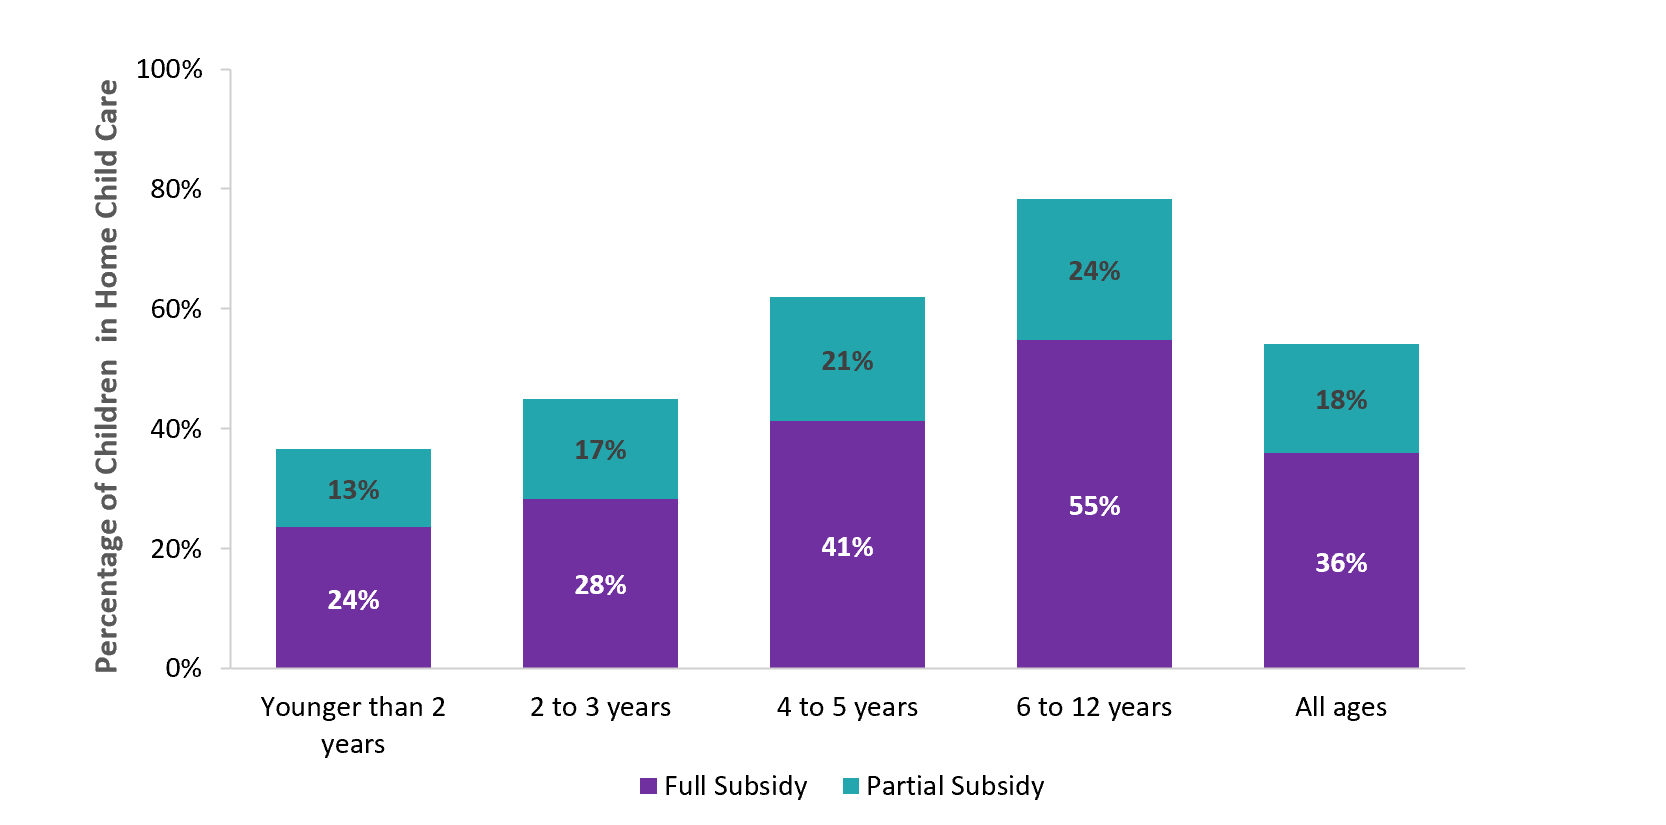 Percentage of children in licensed home child care receiving a full or partial subsidy by age, 2021